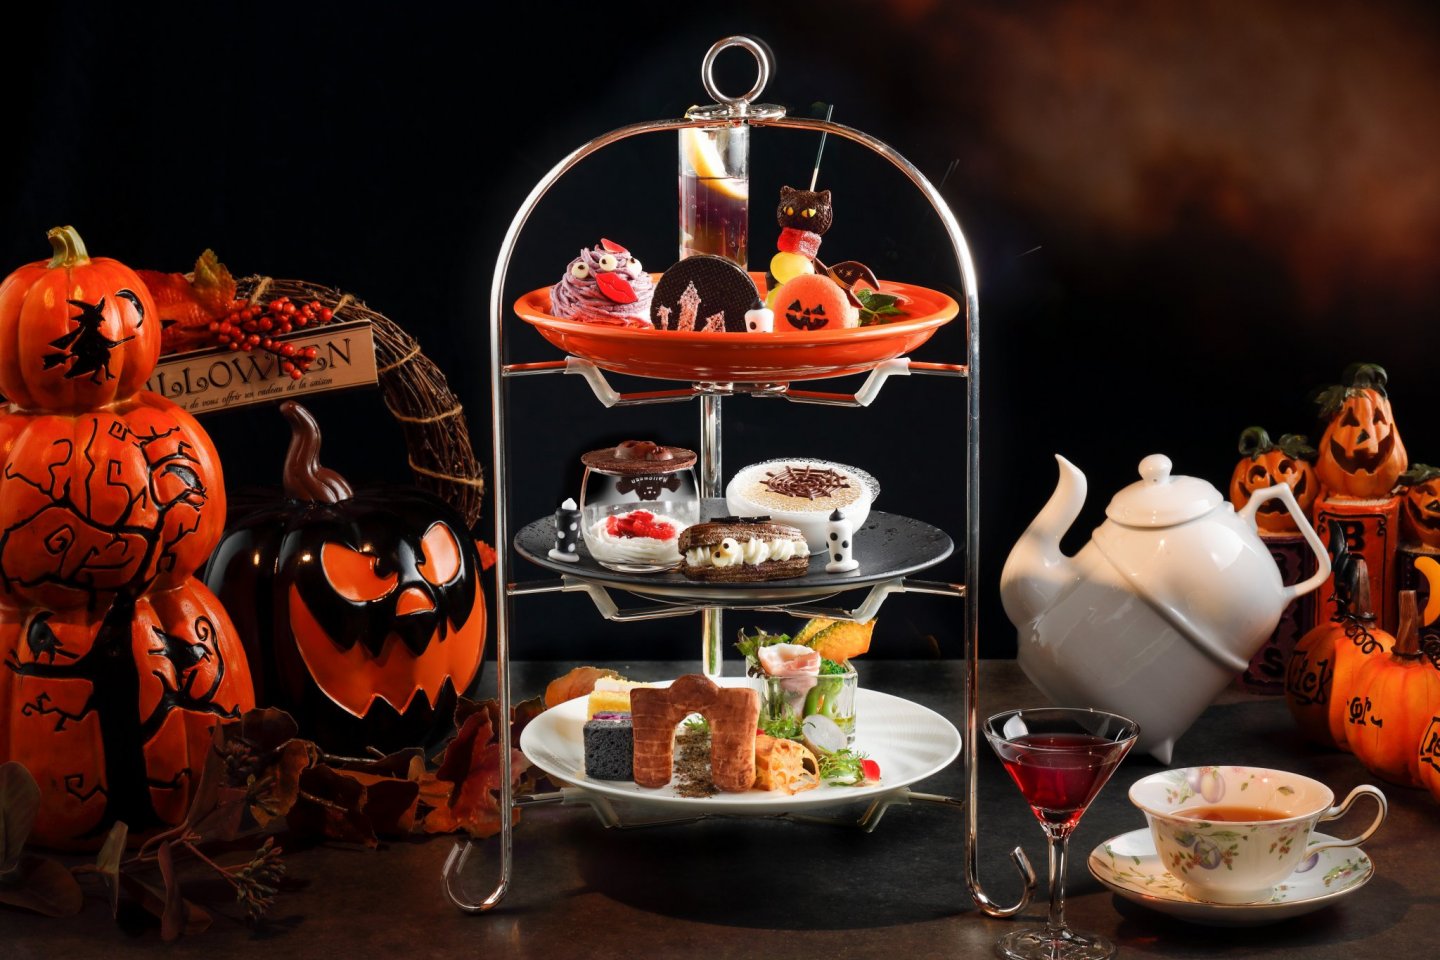 An afternoon tea set with three-tiered tray with Halloween cookies and candies, and finger sandwiches. White teapot set and pumpkins surround it.